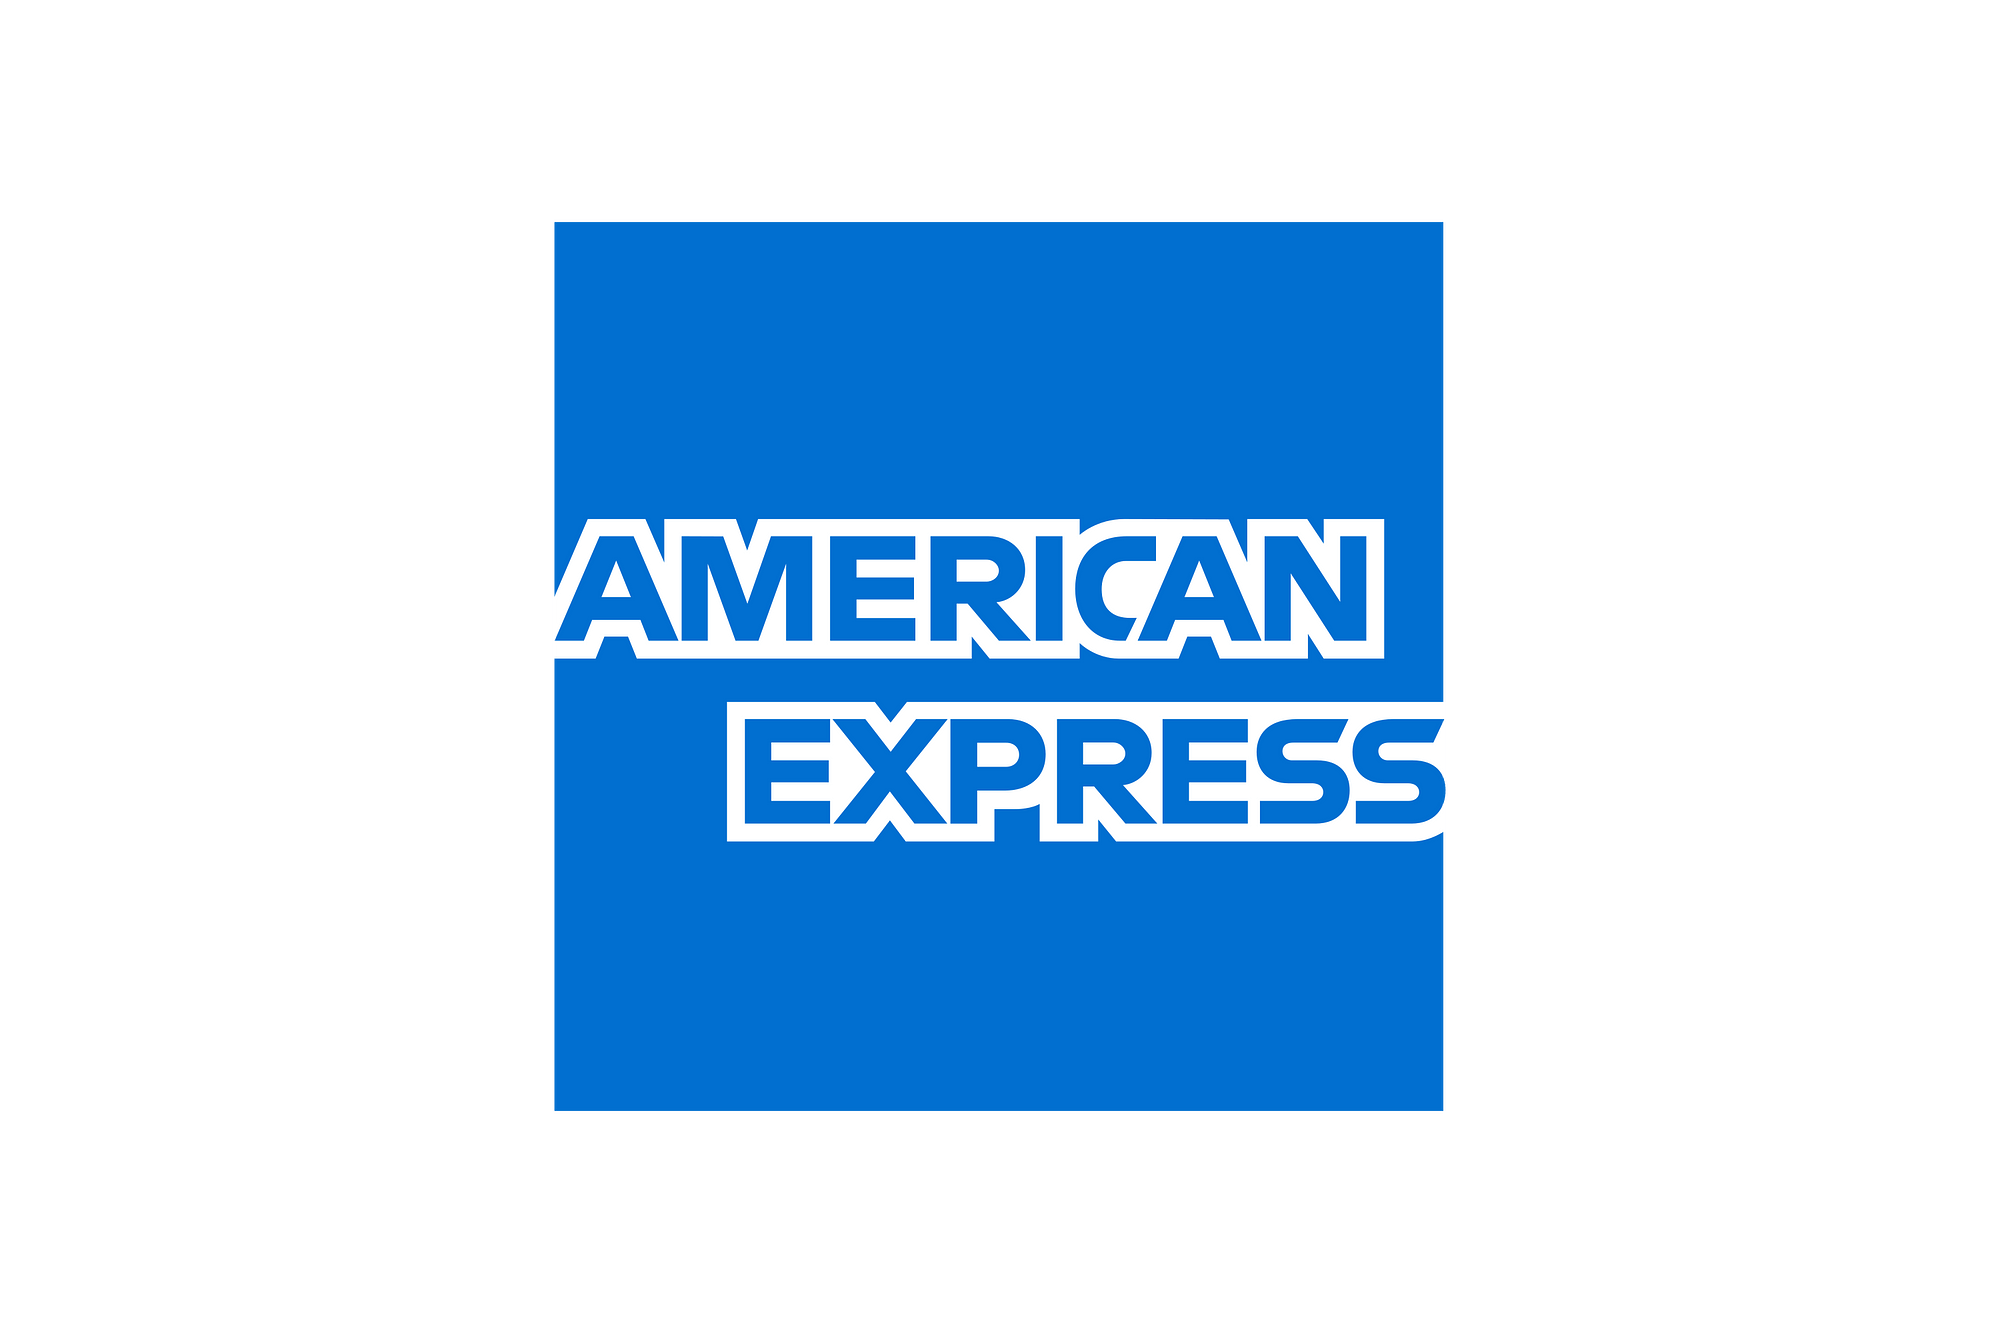 American Express partner of Fly Aeolus